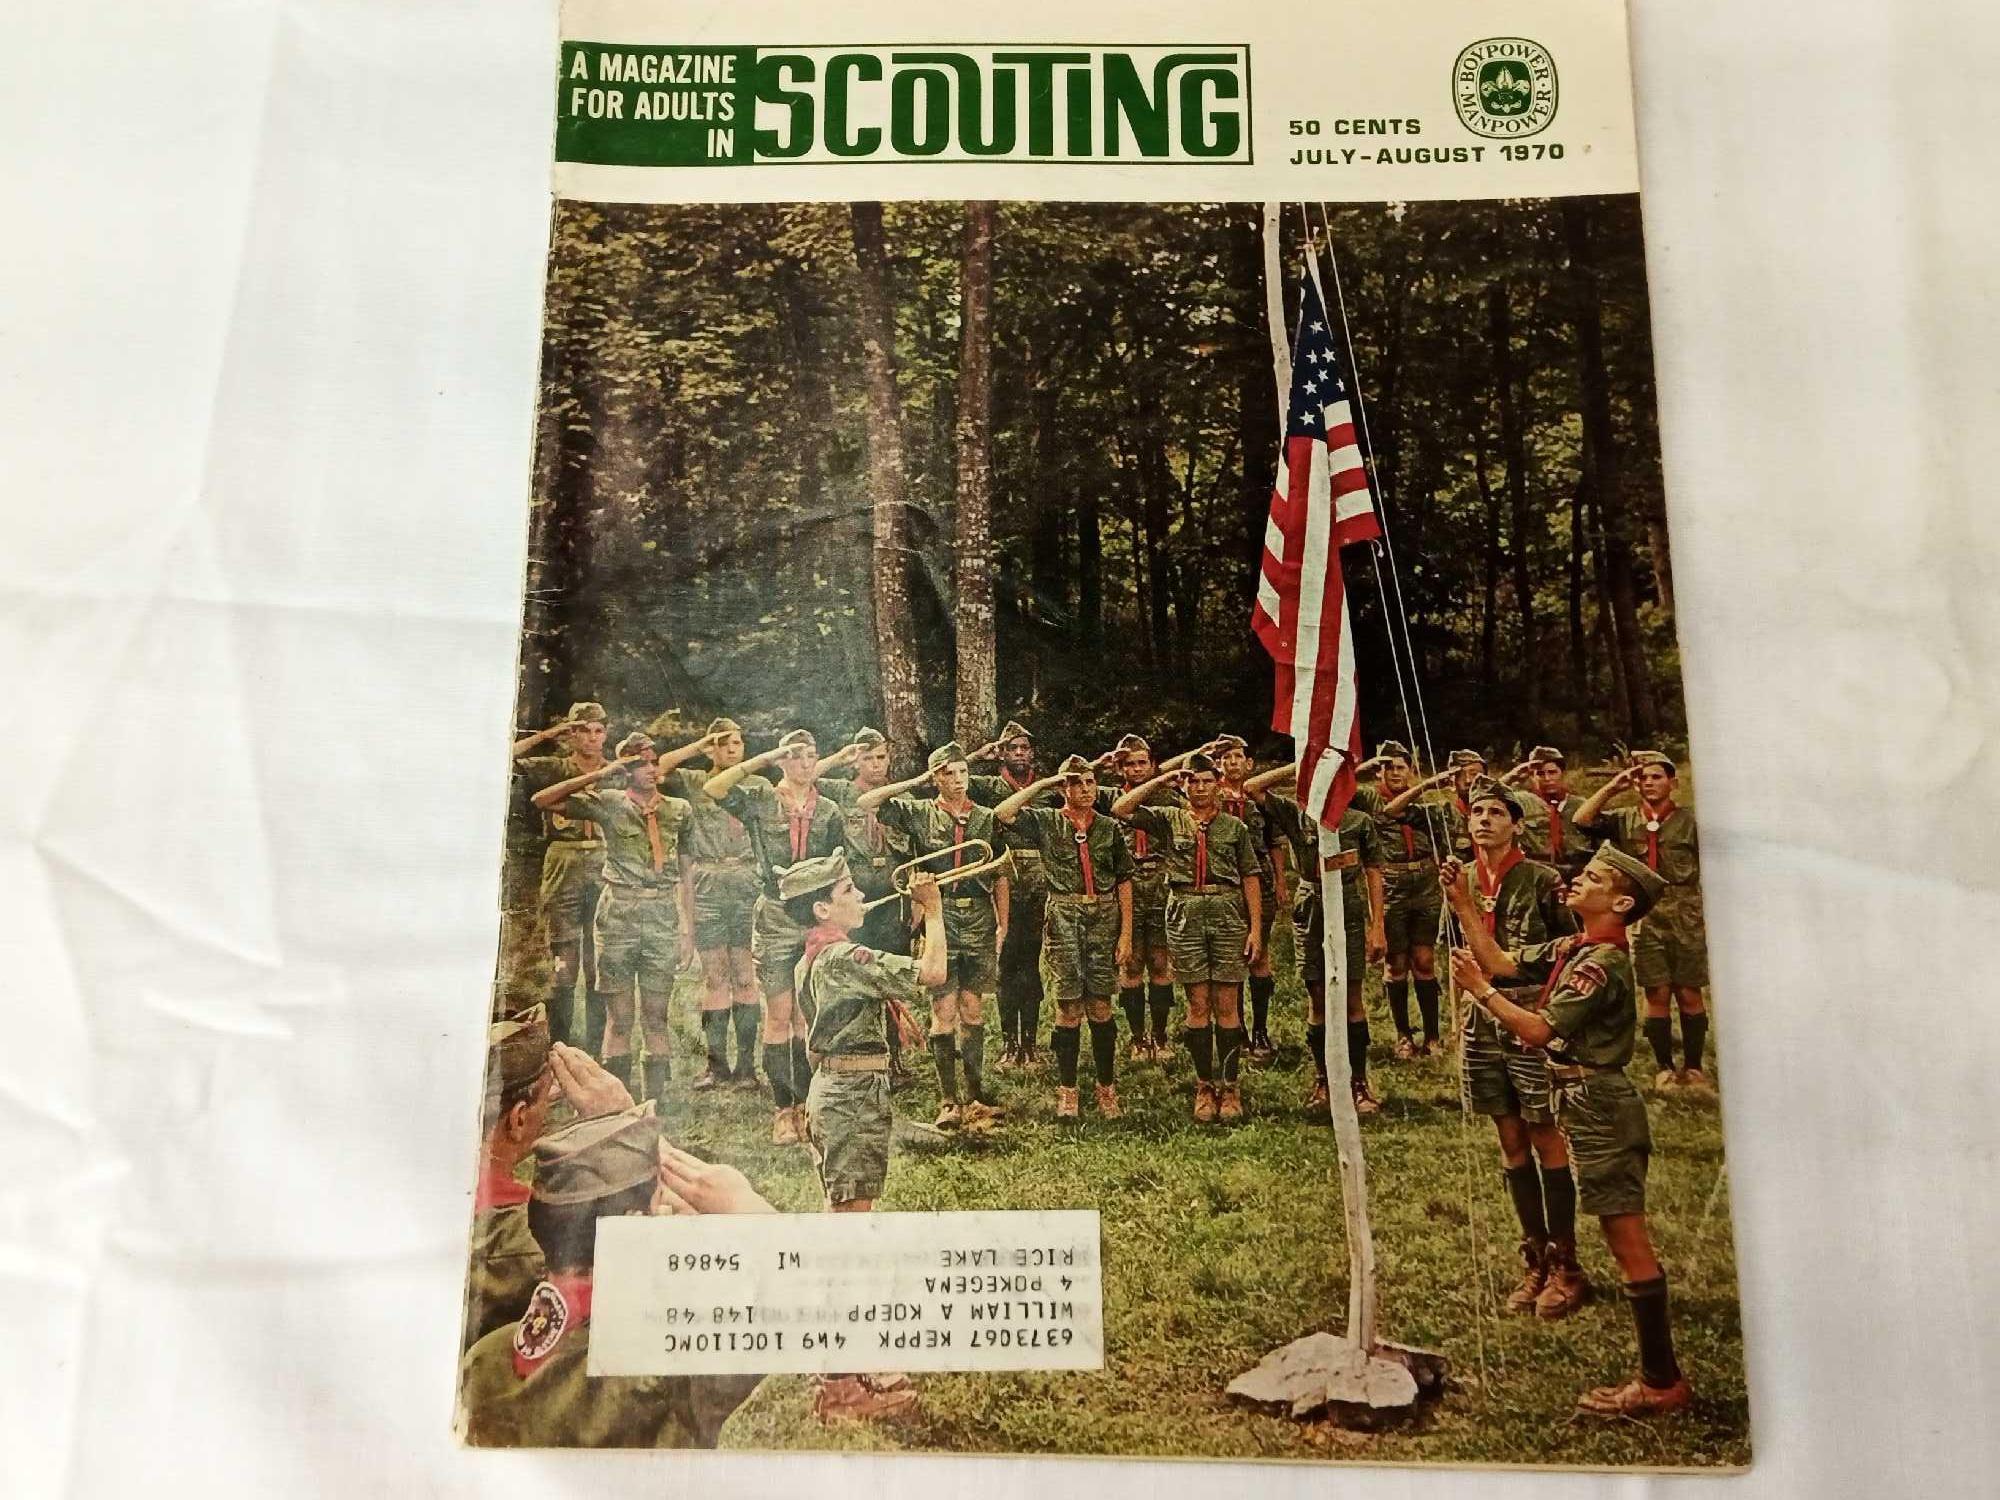 BOY SCOUT MAGAZINES 1957, 1961,'63, '64, '65, '68, '69, '70. 15 TOTAL.